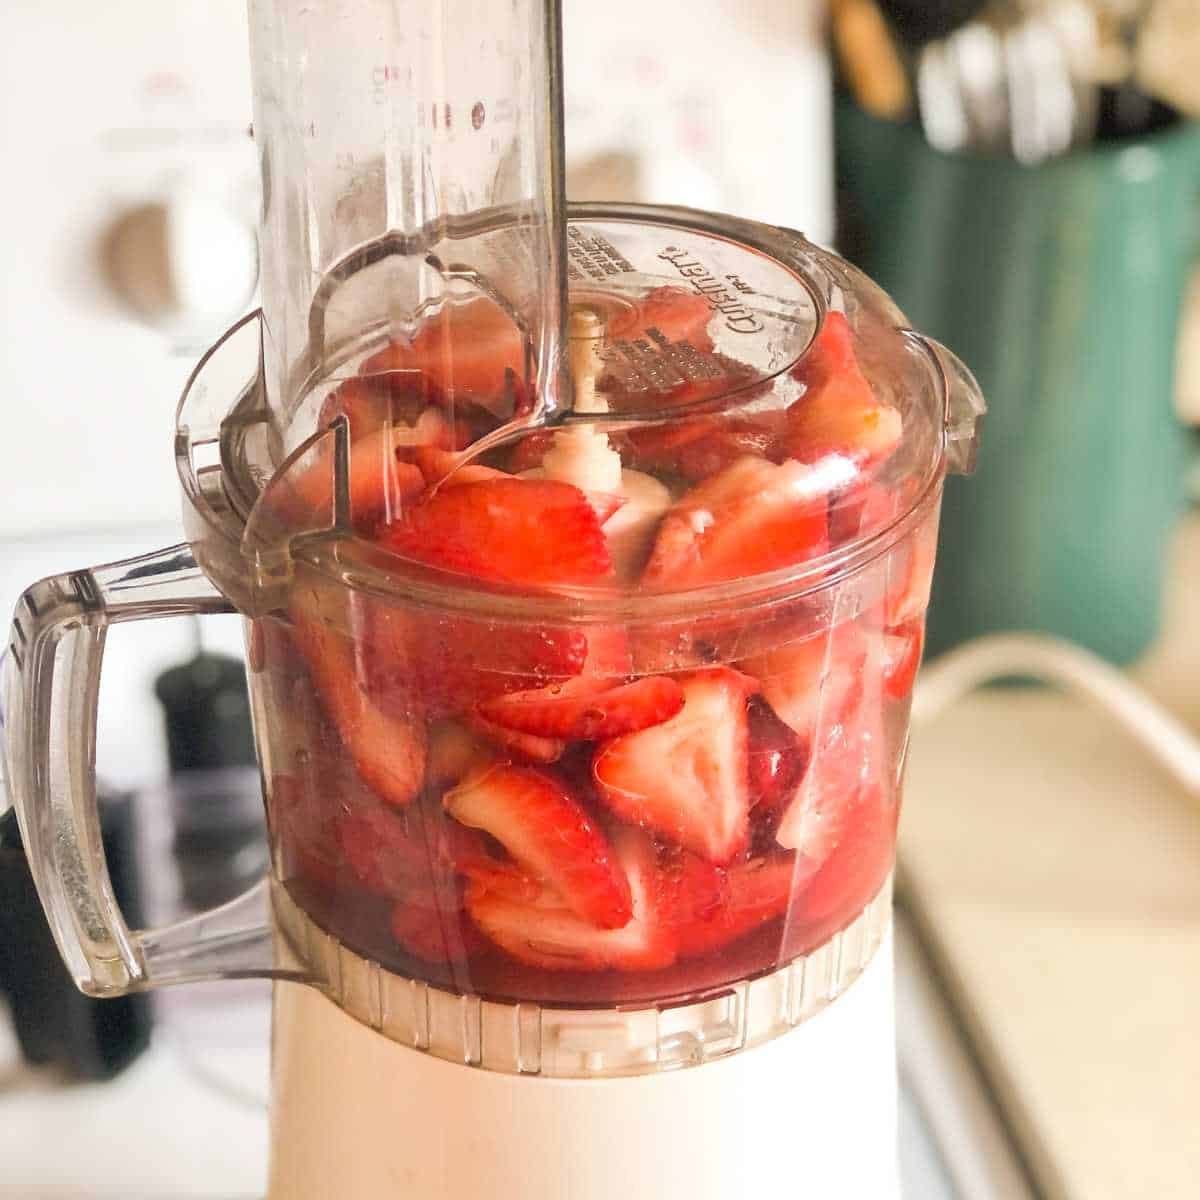 Strawberries and sugar in a food processor before pureeing.